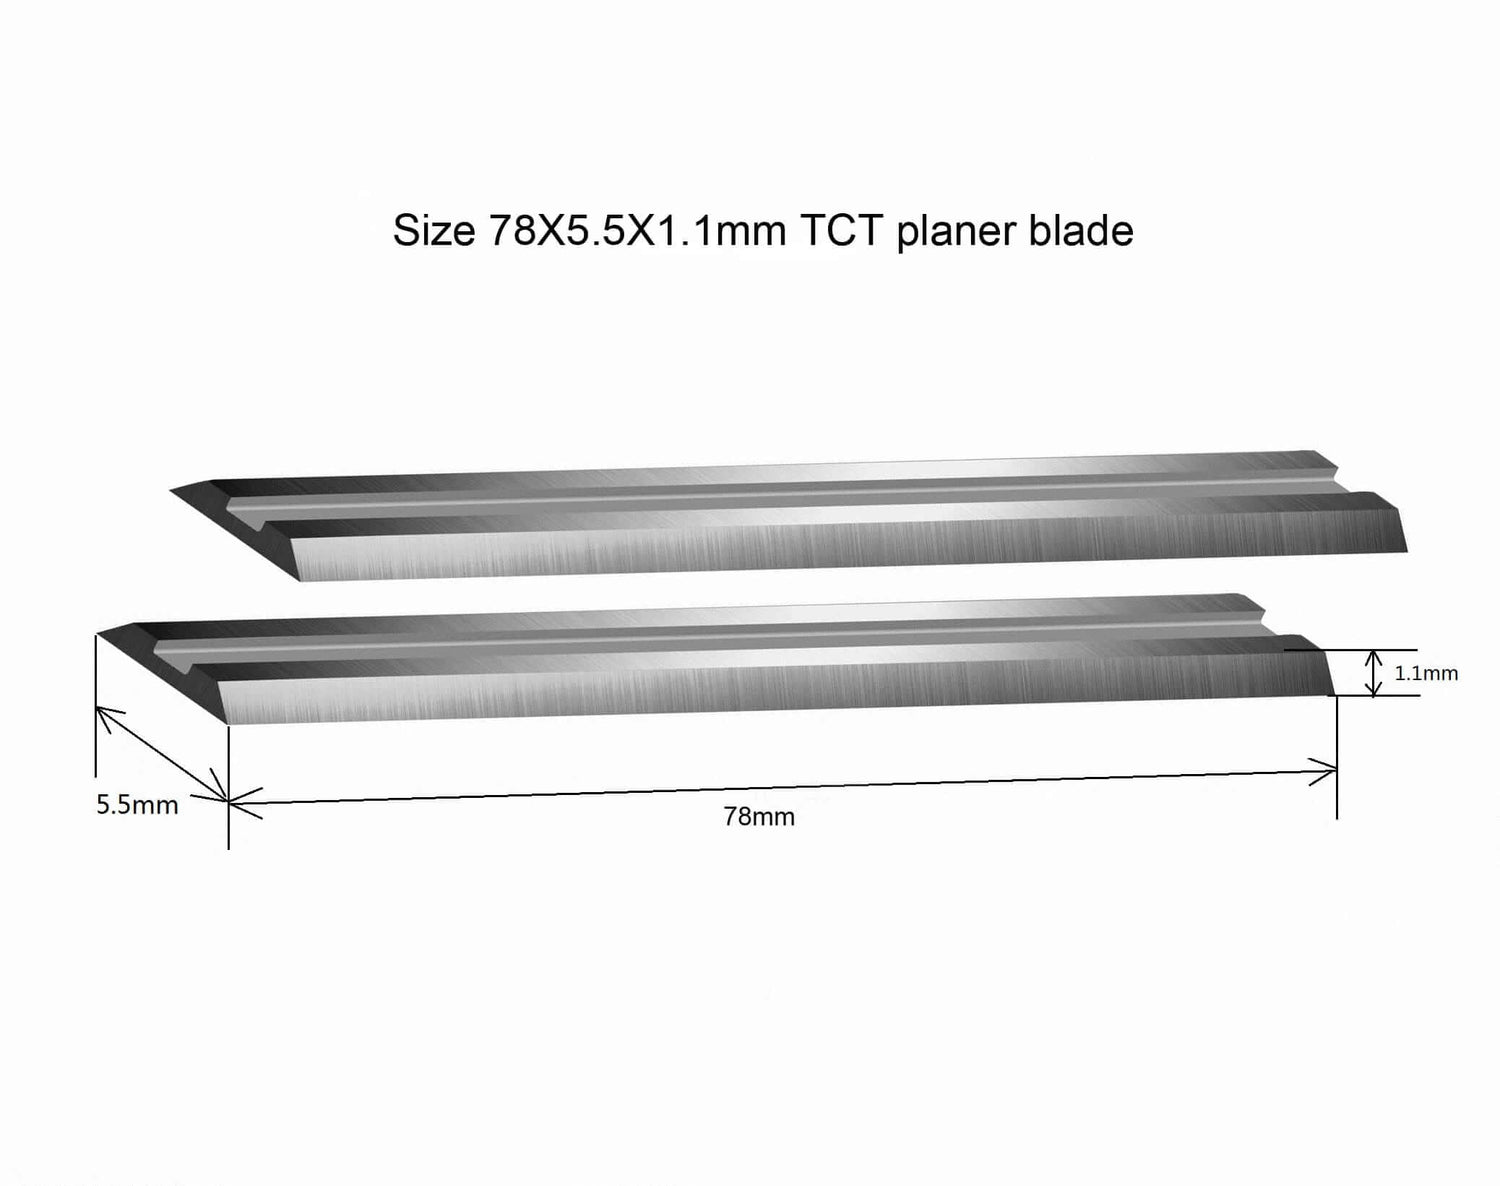 size of carbide planer blade 78x5.5x1.1mm